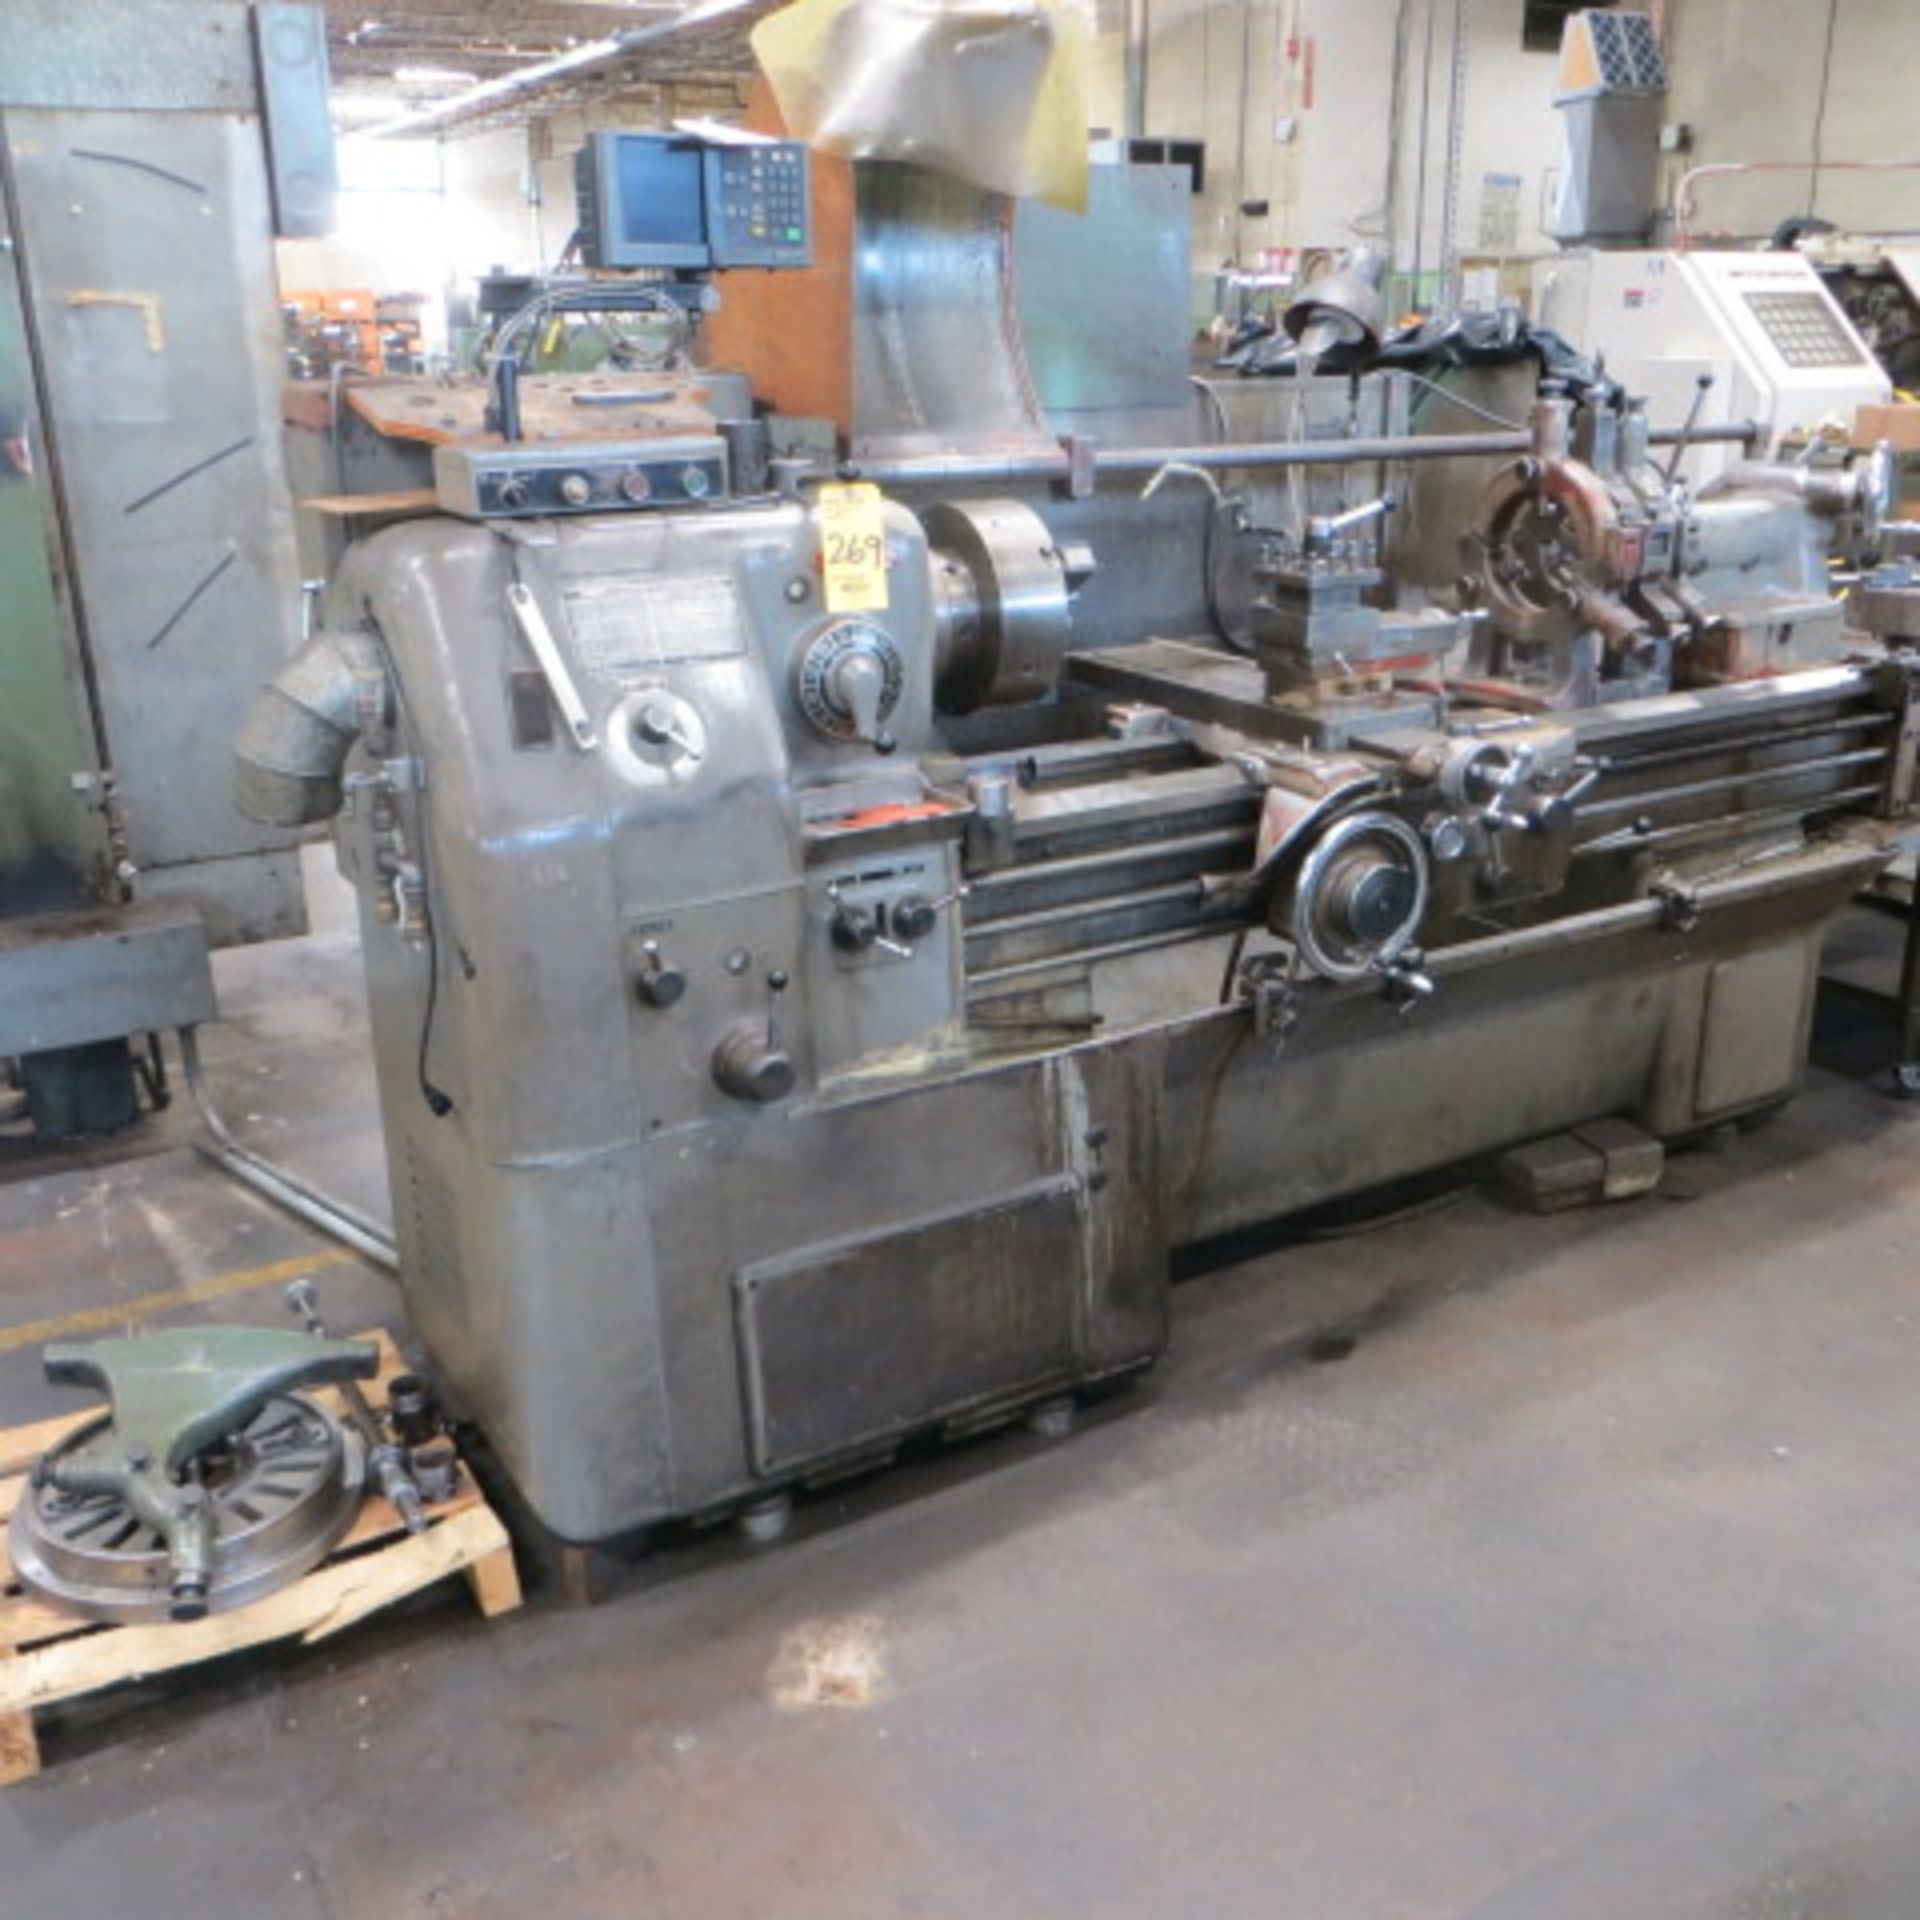 DONG YANG L-S ENGINE LATHE, S/N DY45095 22 IN SWING X 60 IN CC